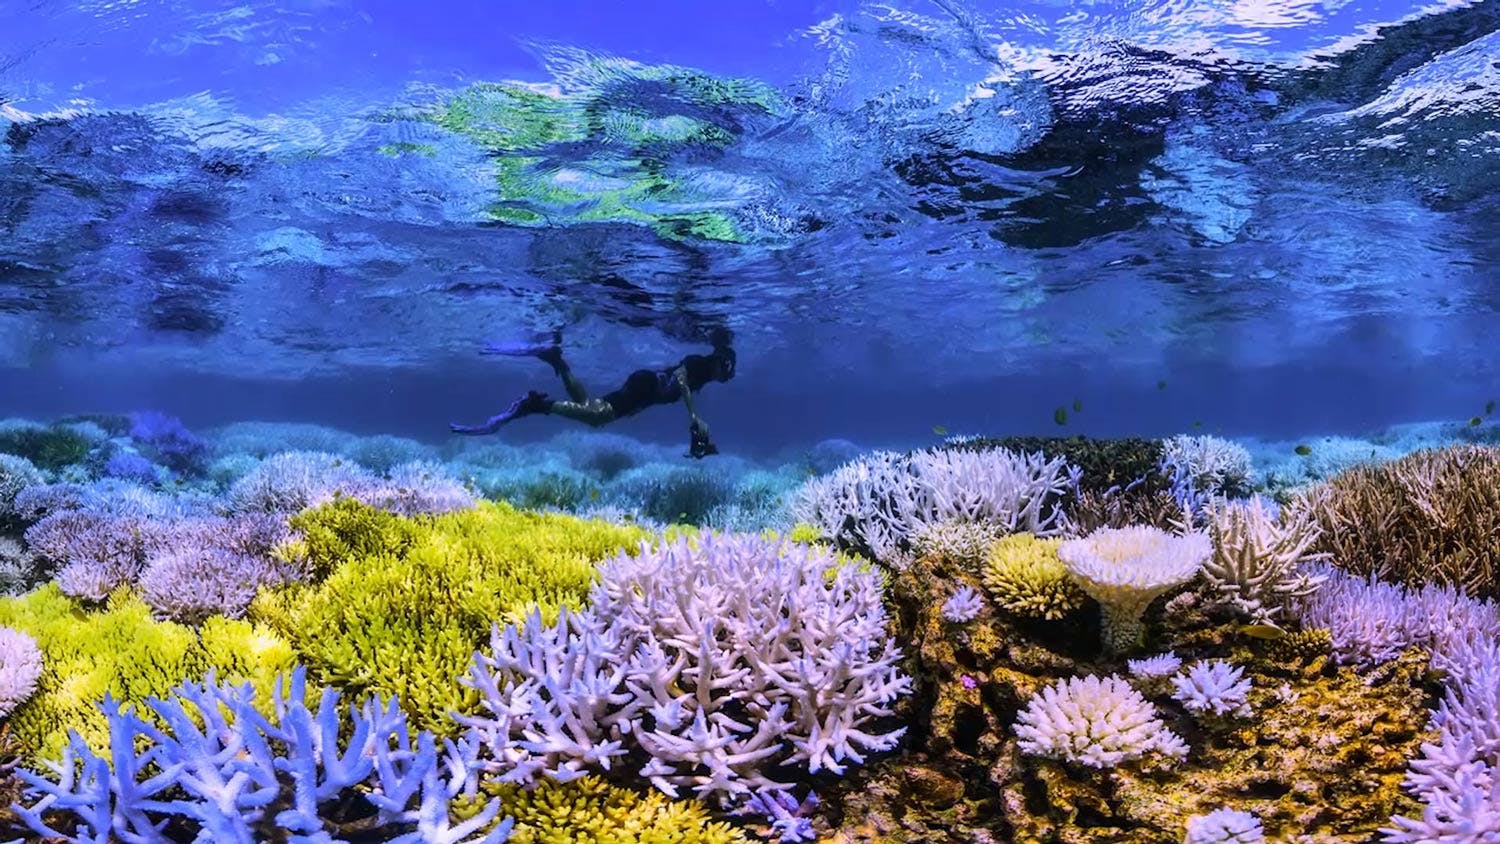 A diver swims above a coral reef with purple, blue, and yellow coral.